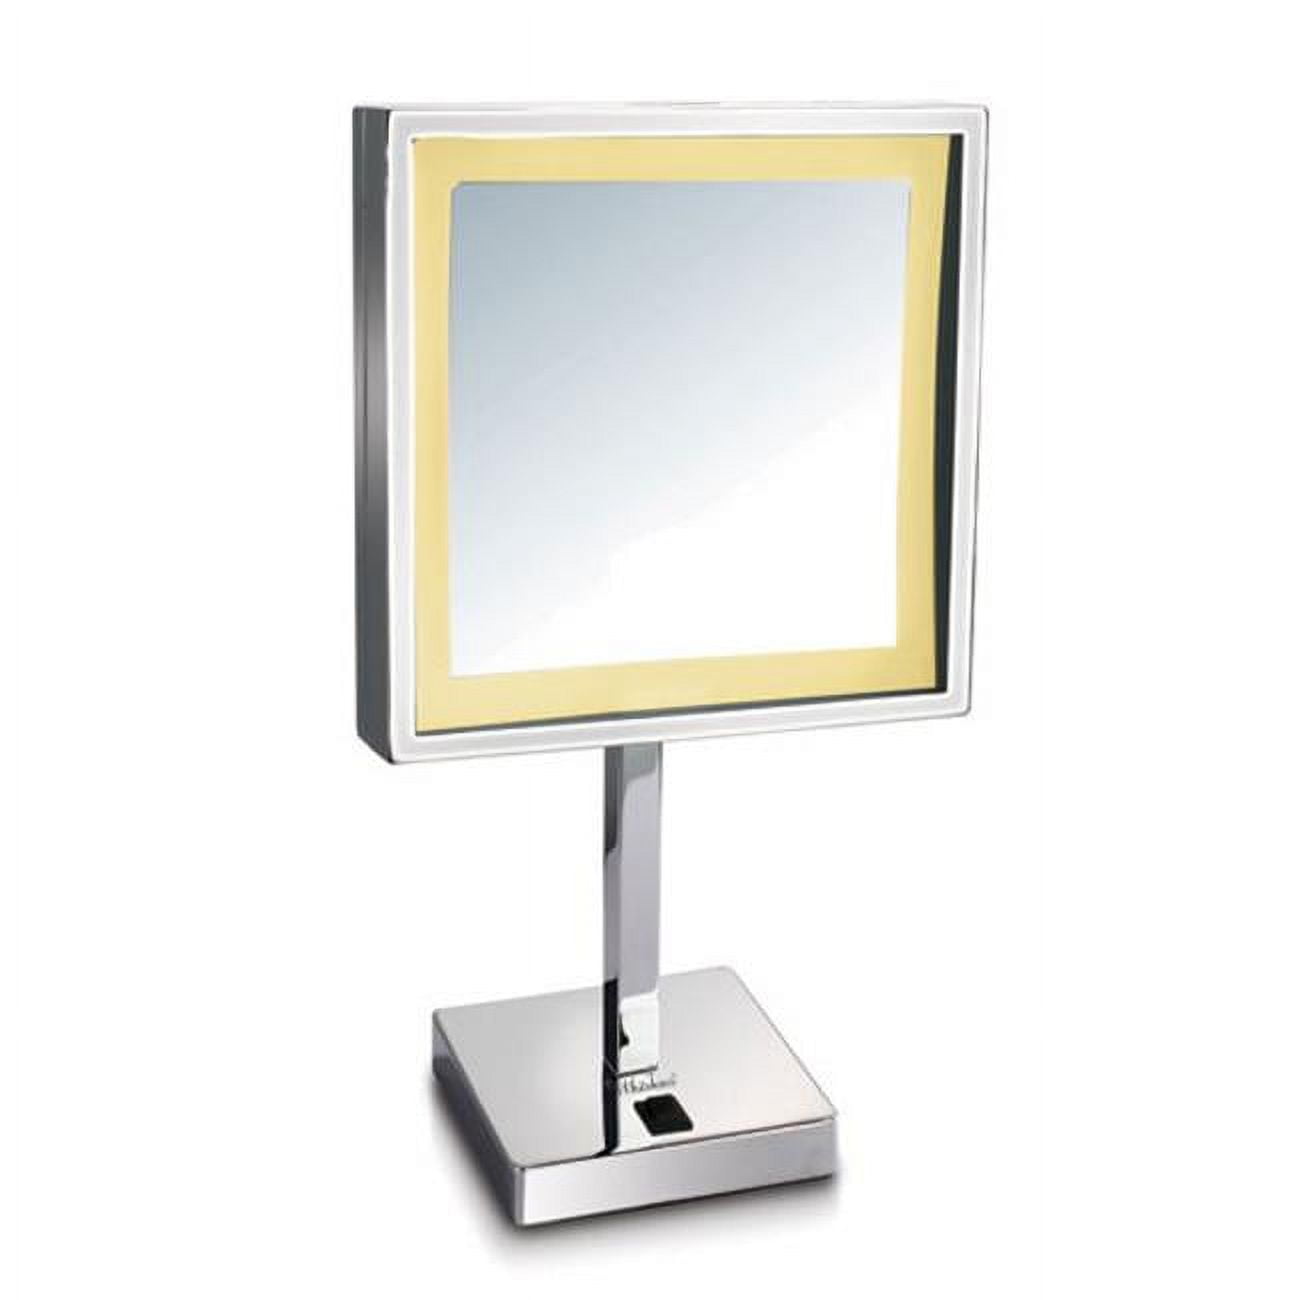 Whmr295-c Square Freestanding Led 5x Magnified Mirror - Polished Chrome